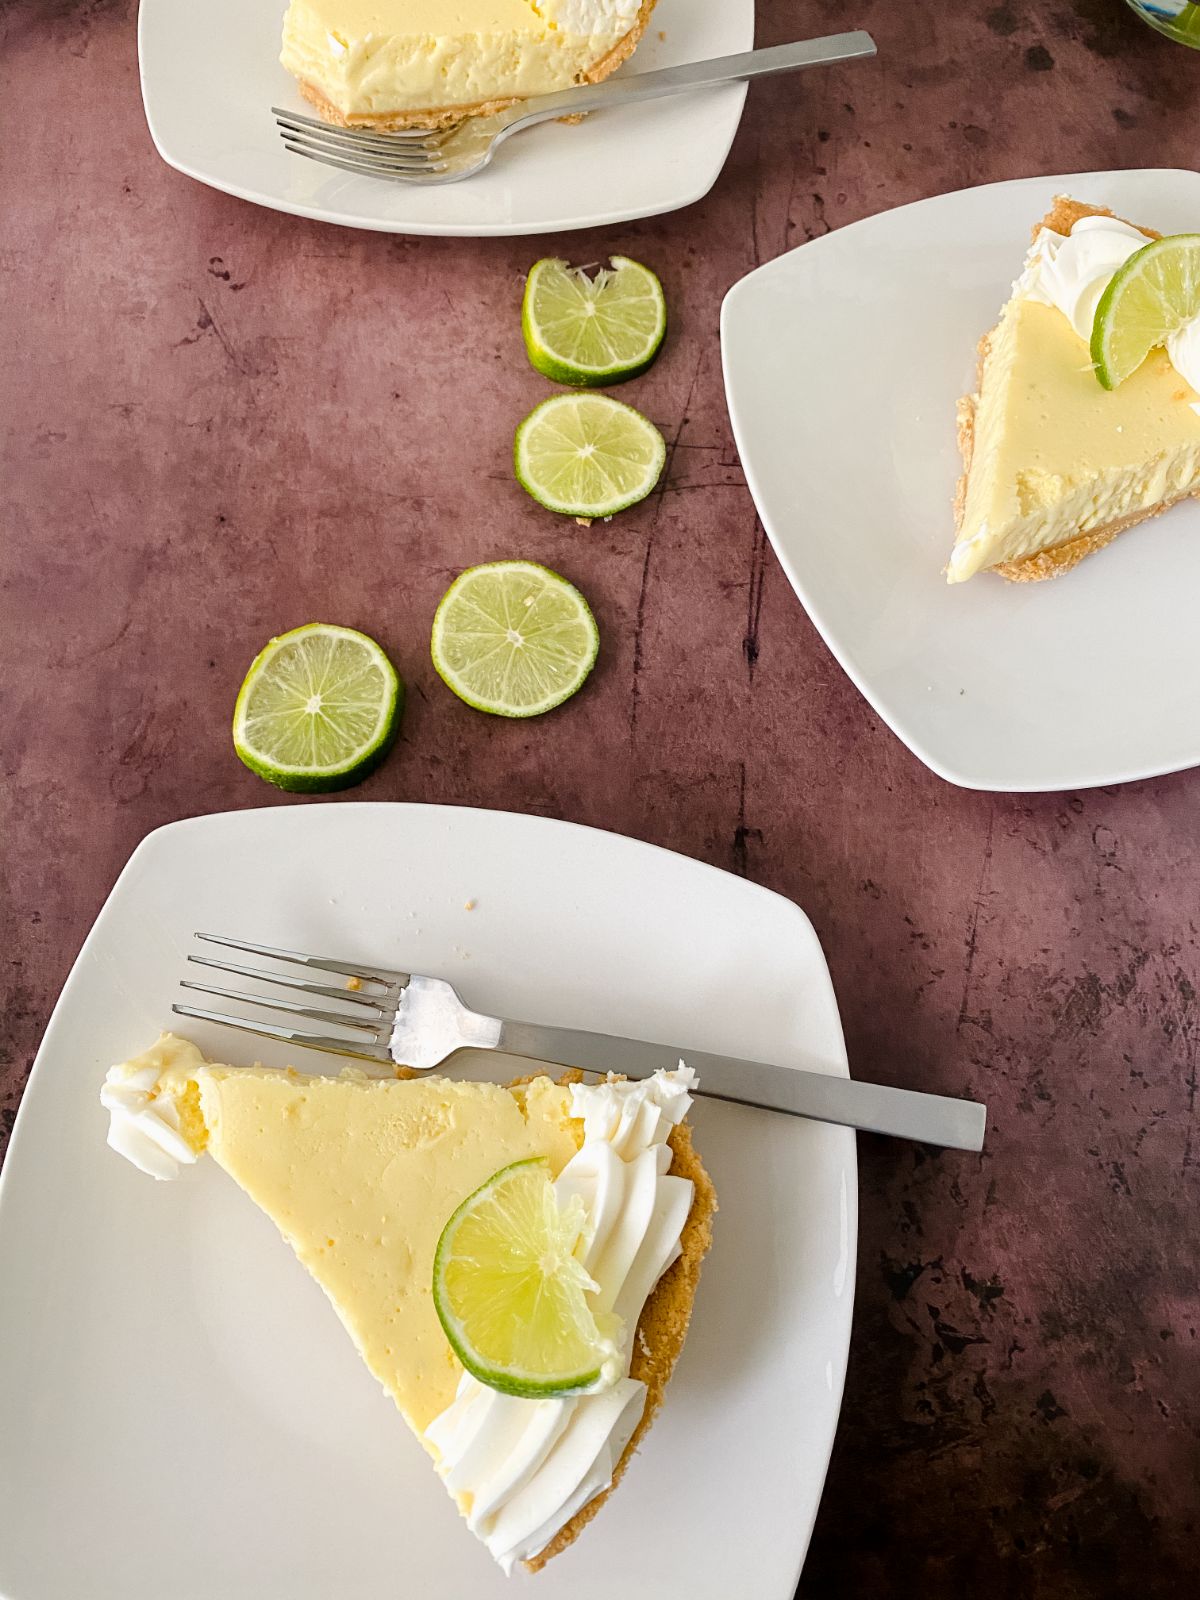 slice of key lime pie on white plate with sliced limes on table